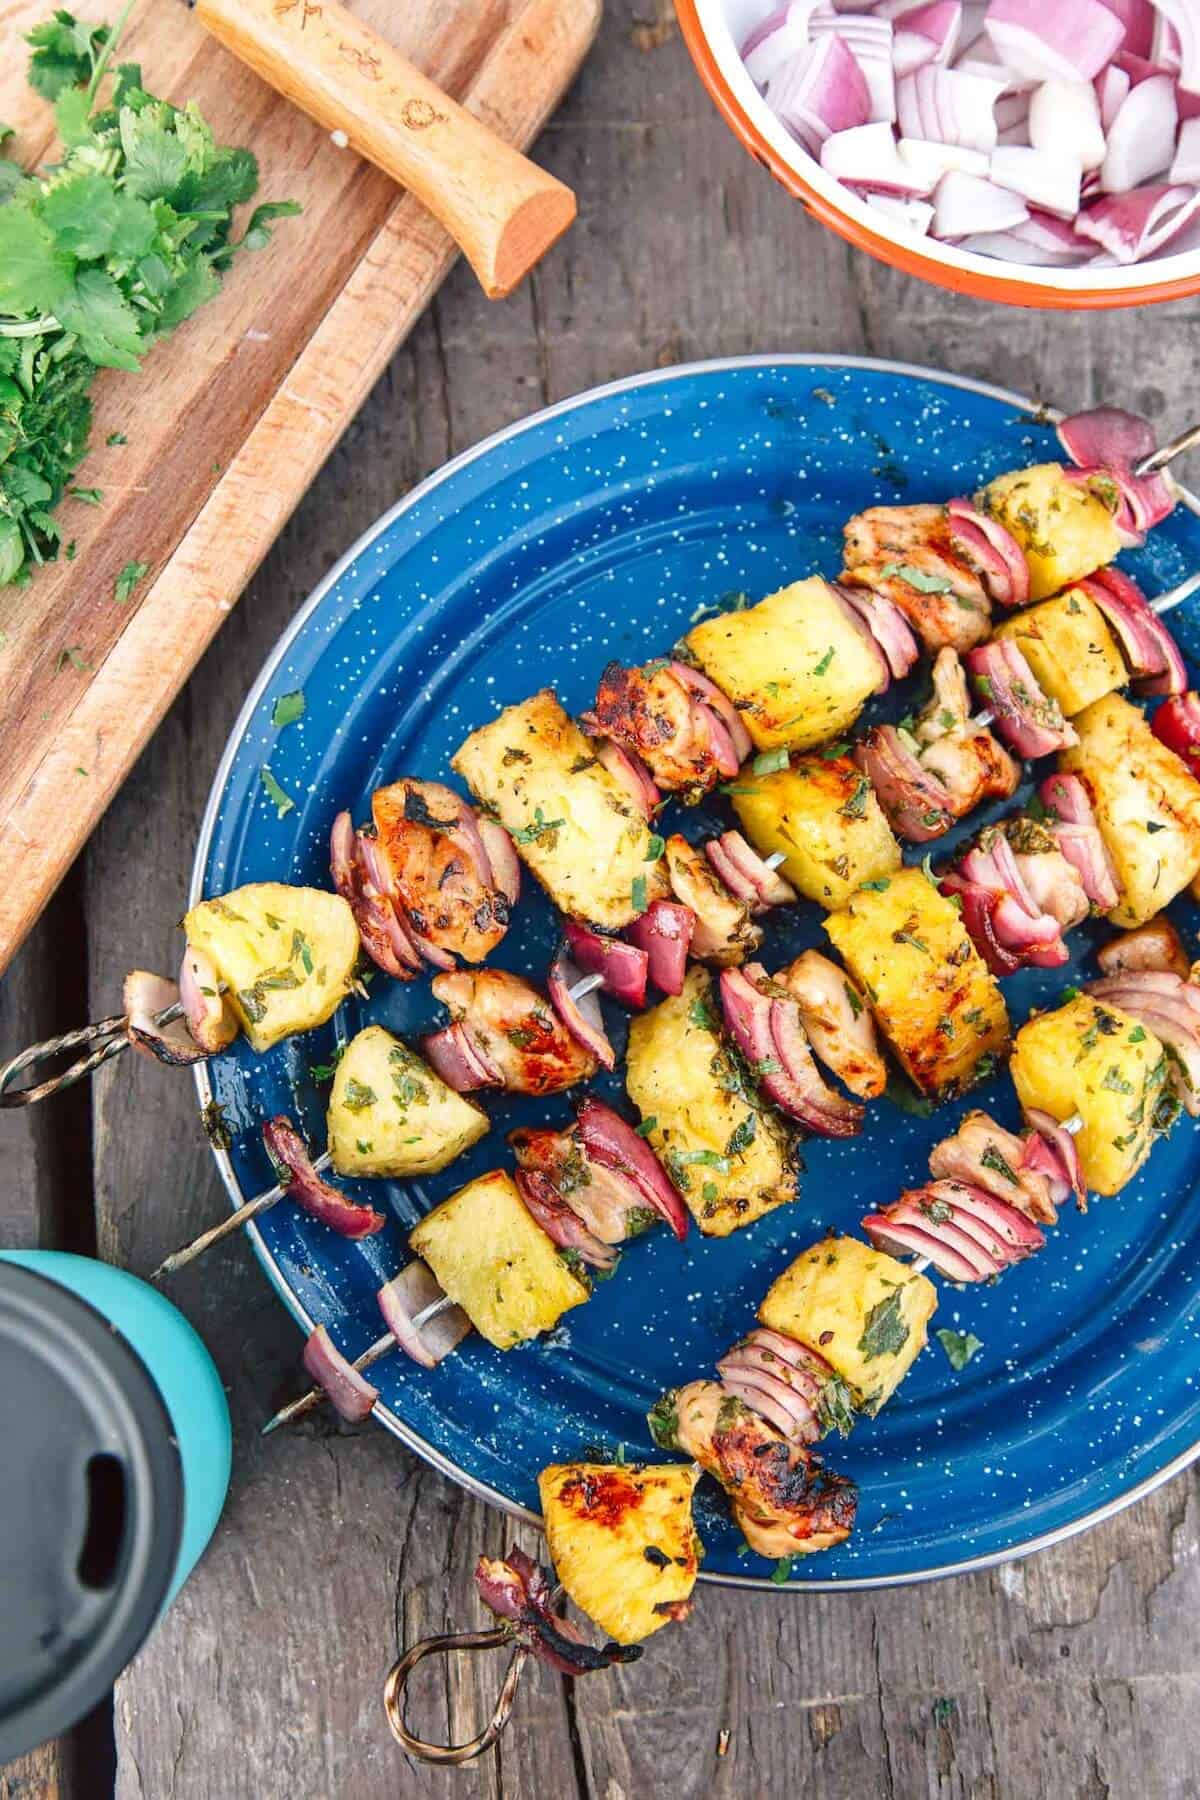 4 chicken and pineapple skewers on a large blew plate.